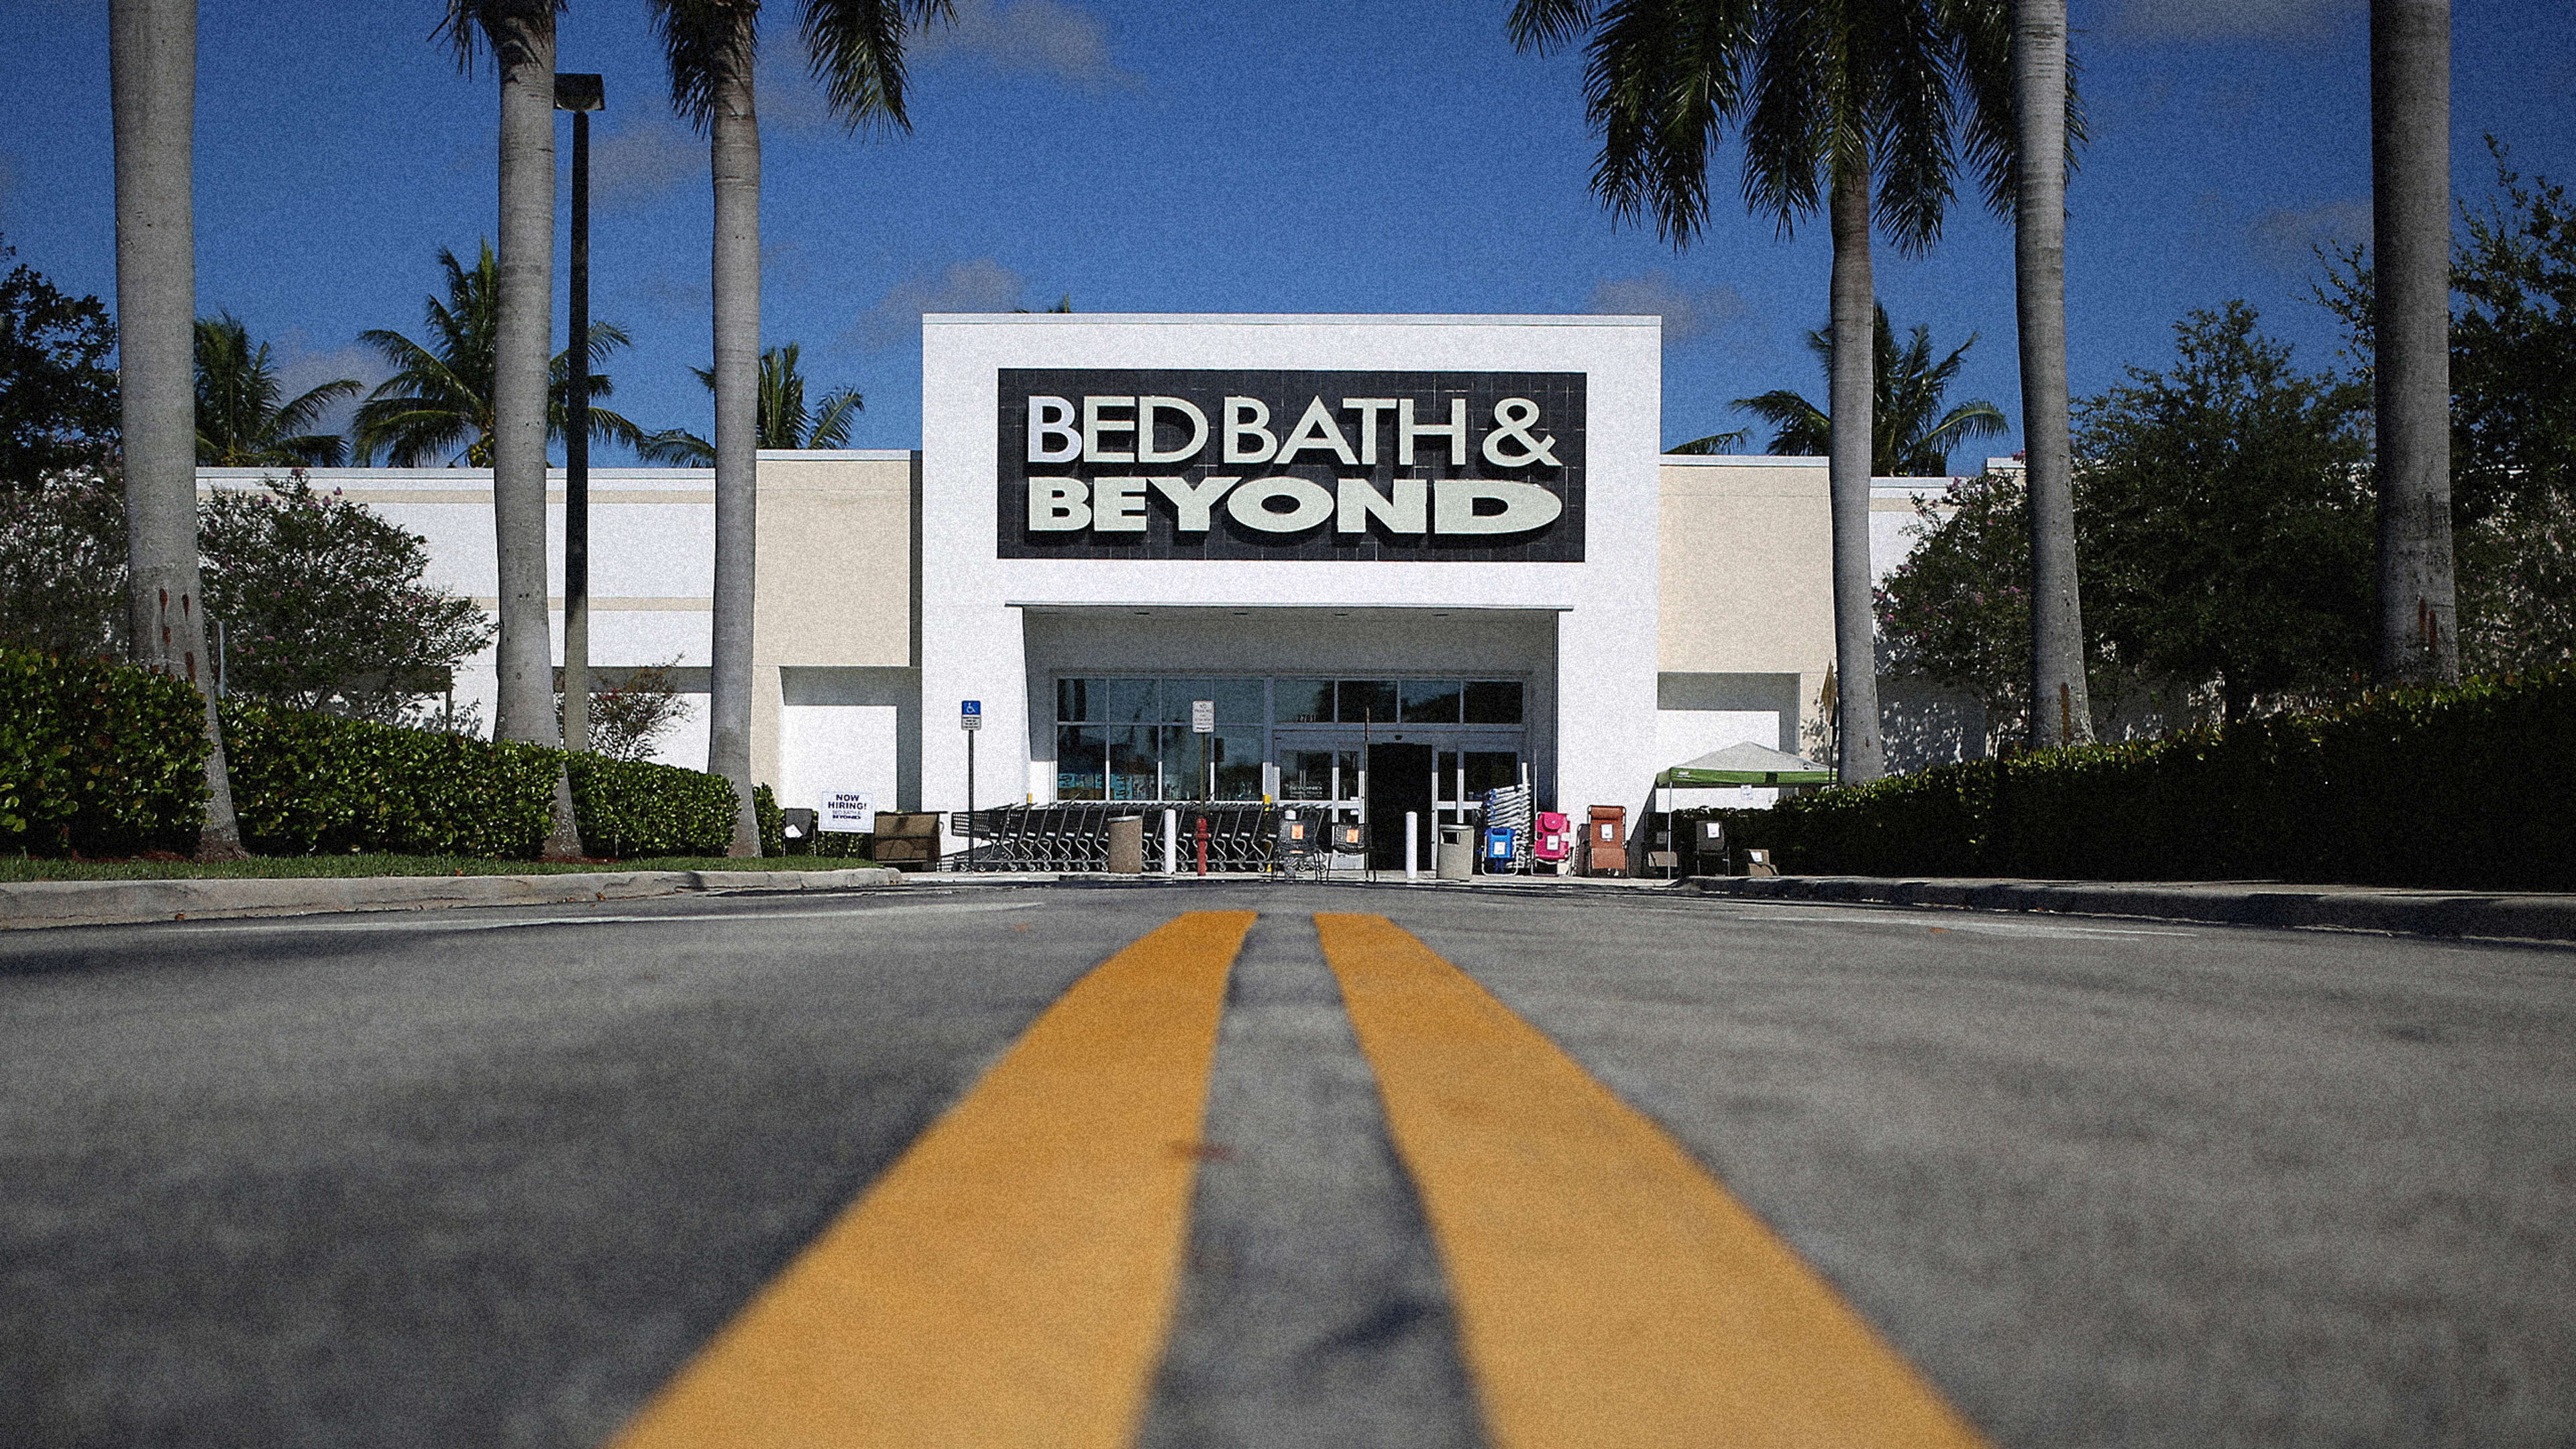 What’s going on with Bed Bath & Beyond?